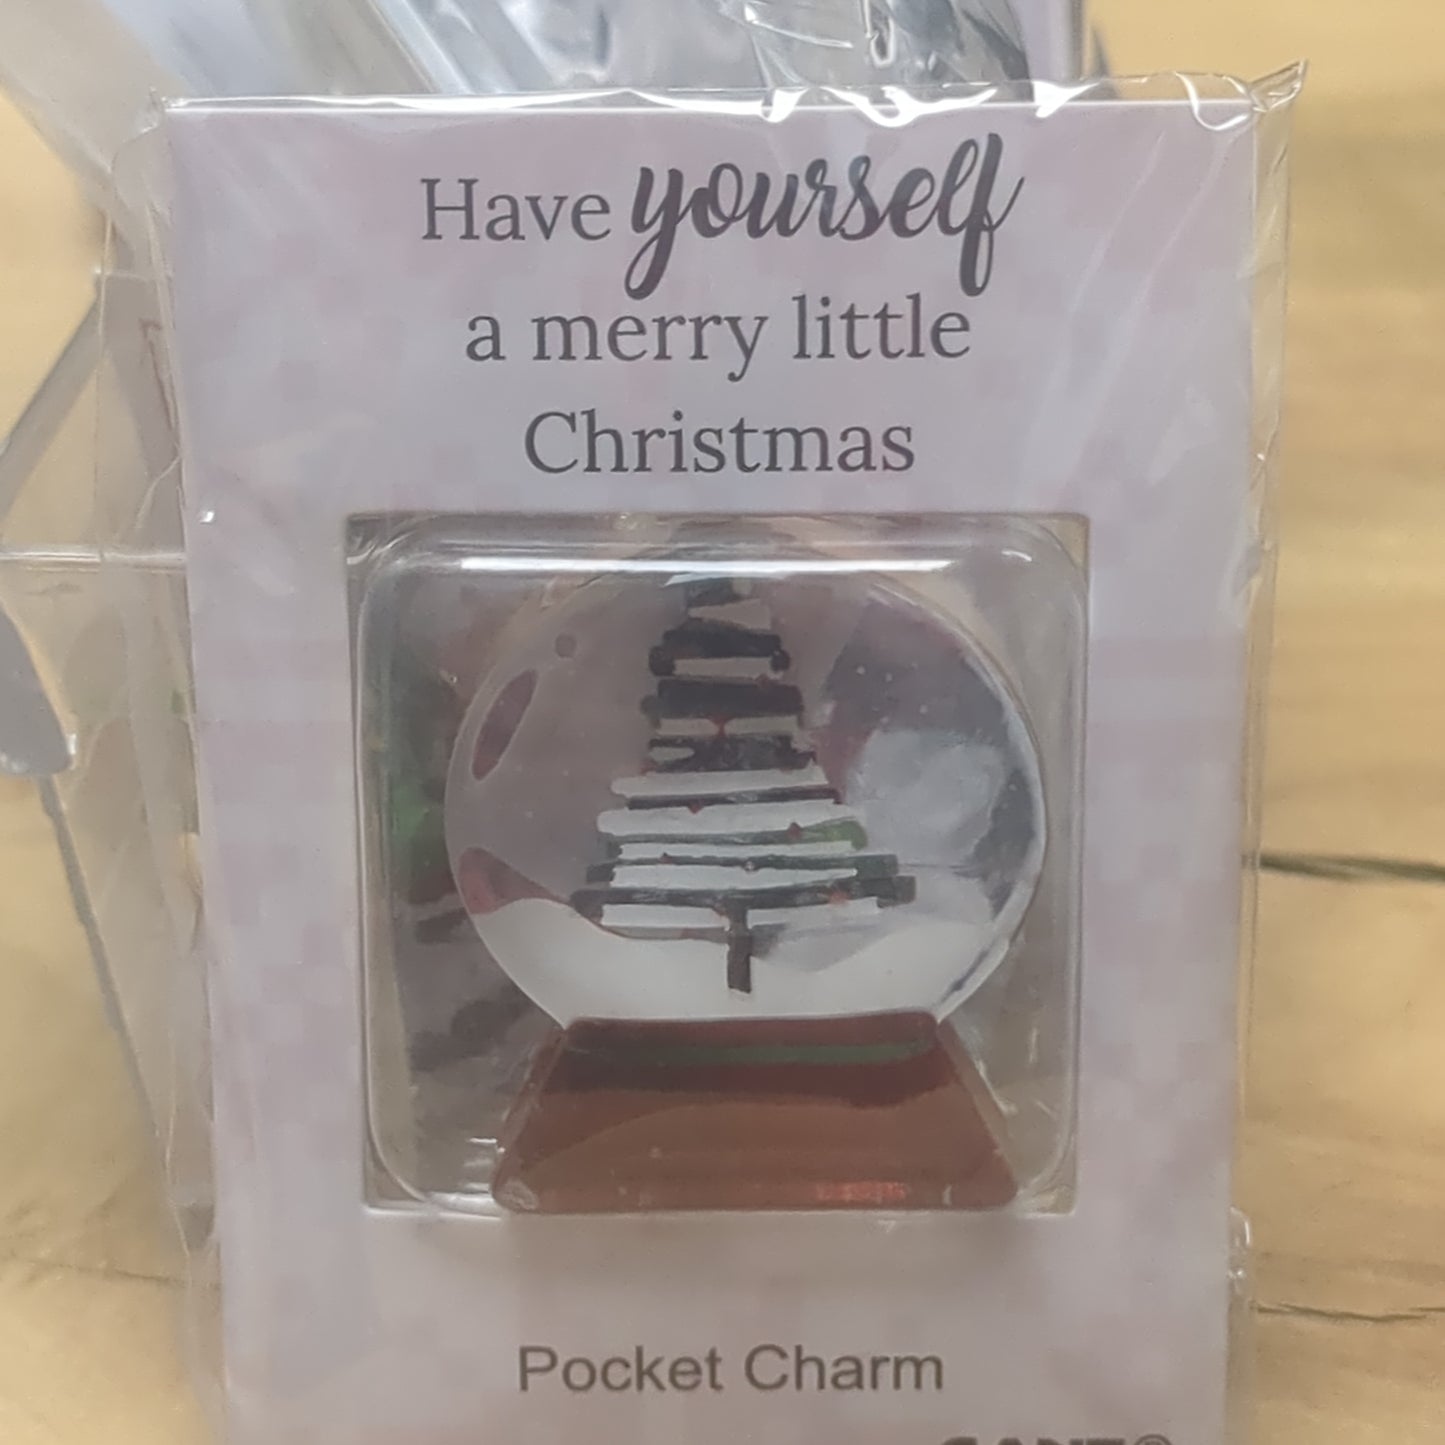 Pocket charm snow globe appearance with tree inside. Have yourself a Merry Little Christmas